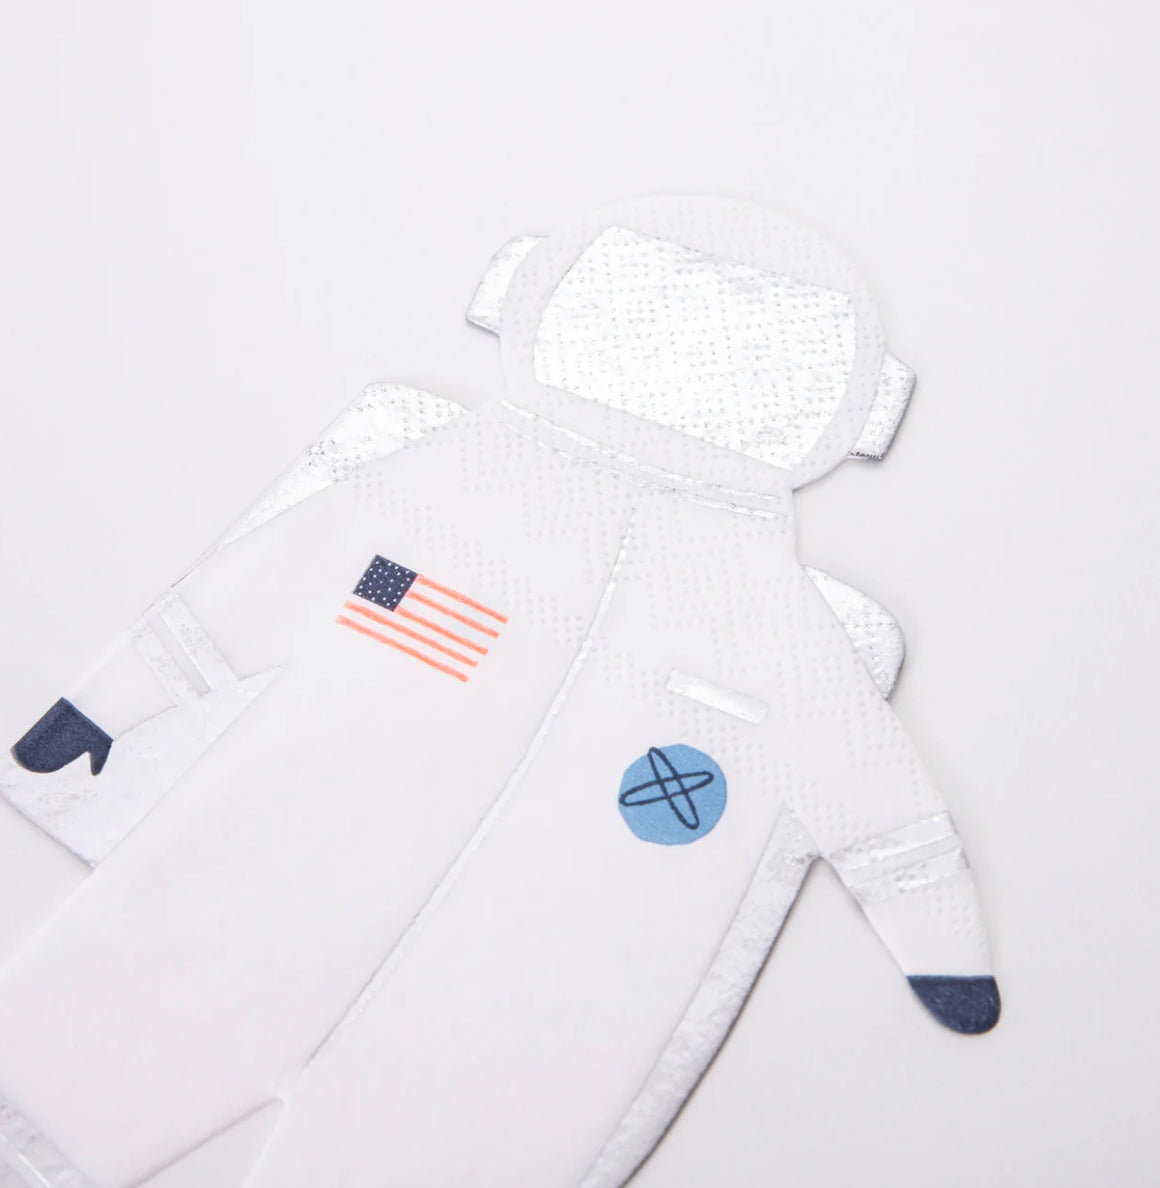 NAPKINS SMALL - SPACE ASTRONAUT